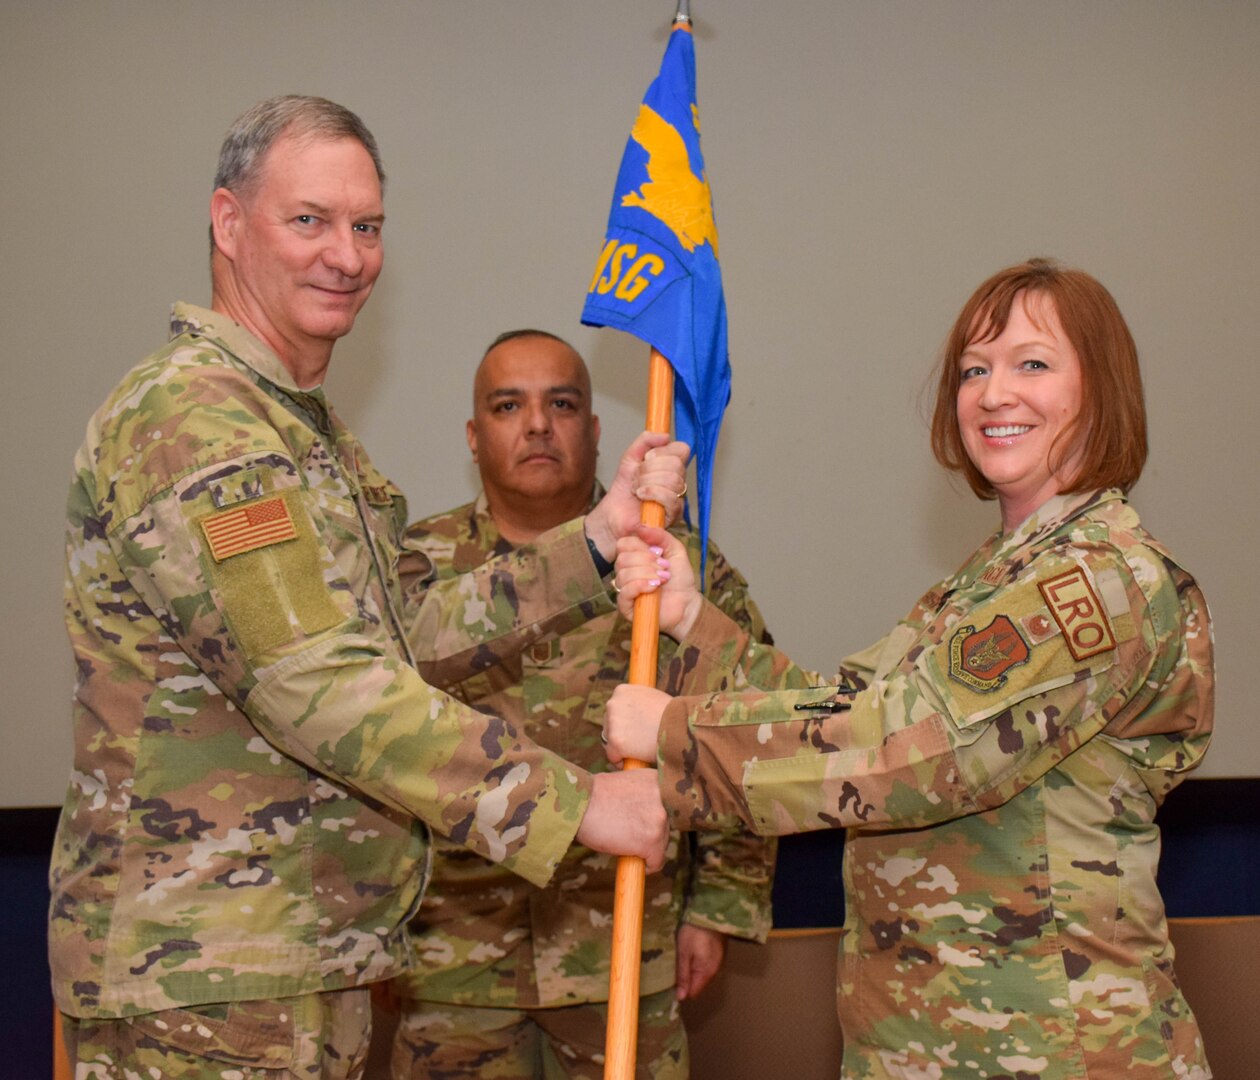 Col. Terry W. McClain, 433rd Airlift Wing commander, presents the 433rd Mission Support Group guidon to Col. Jeanne E. Bisesi during the 433rd Mission Support Group change of command ceremony, at Joint Base San Antonio-Lackland, Texas, March 5, 2022. Bisesi was previously the Reserve Advisor to the Director of Logistic, Engineering and Force Protection, Air Mobility Command, Scott Air Force Base, Illinois. (U.S. Air Force photo by Airman Mark Colmenares)